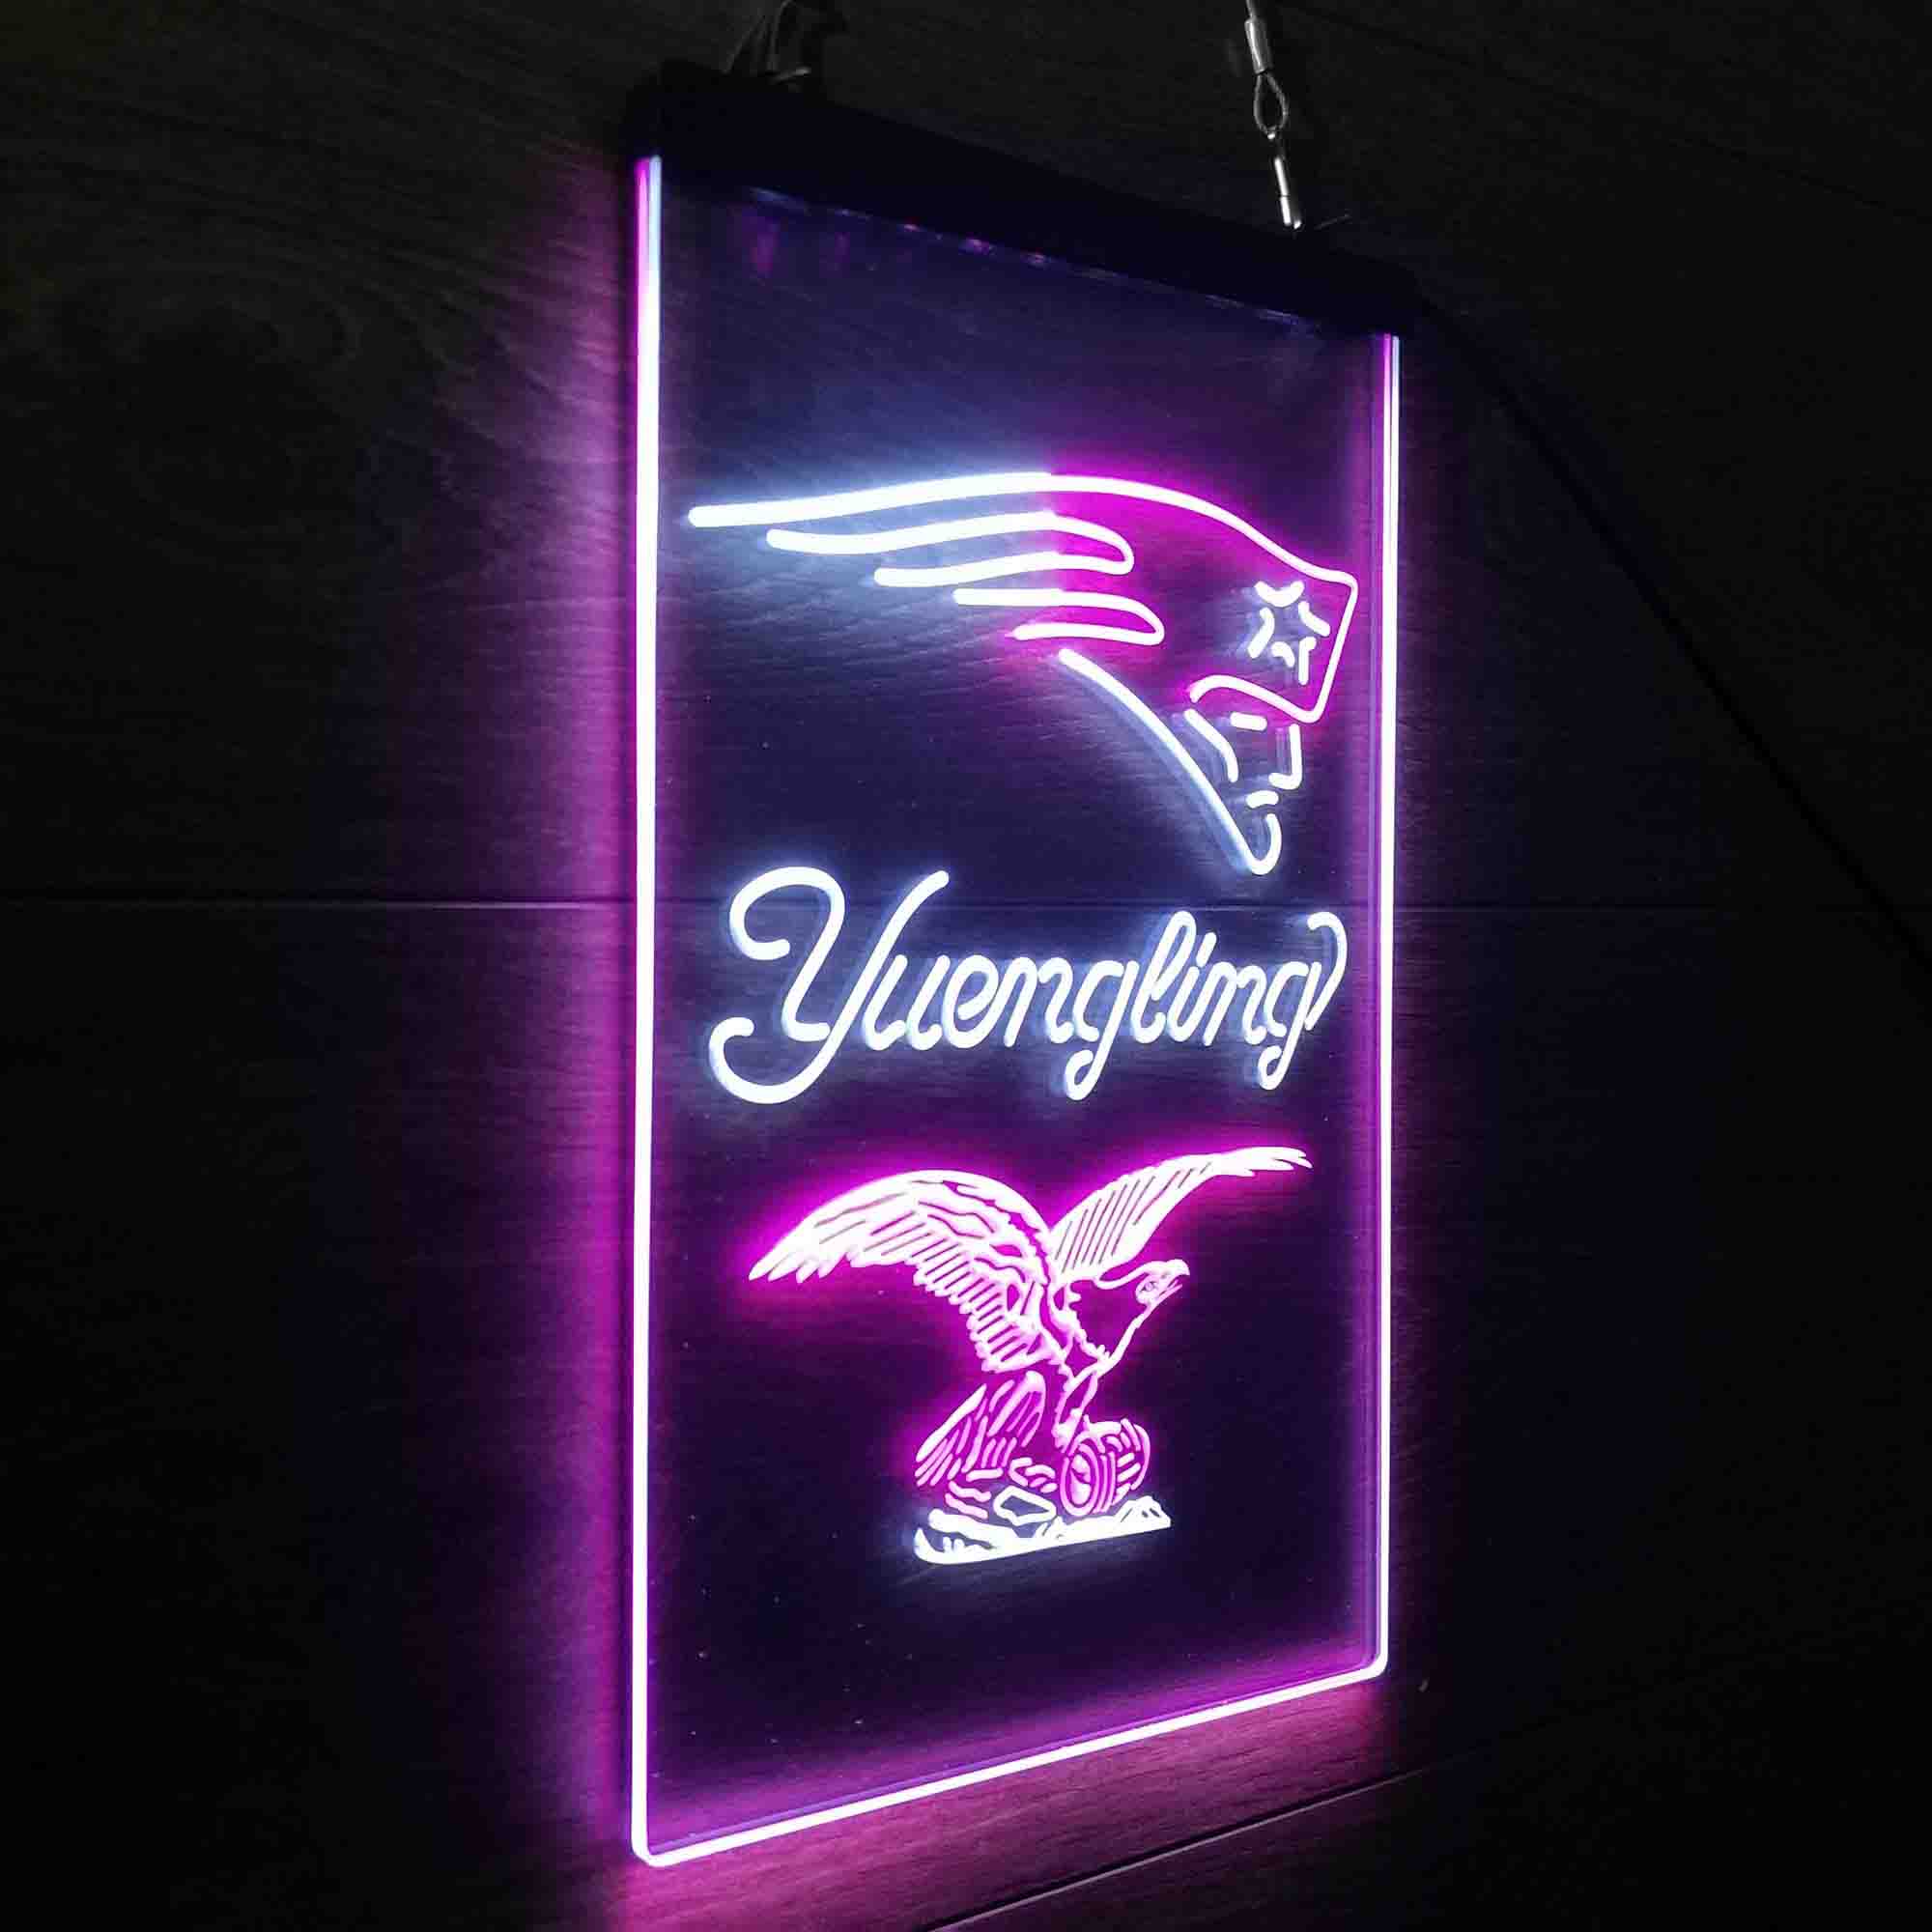 Yuengling Bar New England Patriots Est. 1960 Neon-Like LED Sign